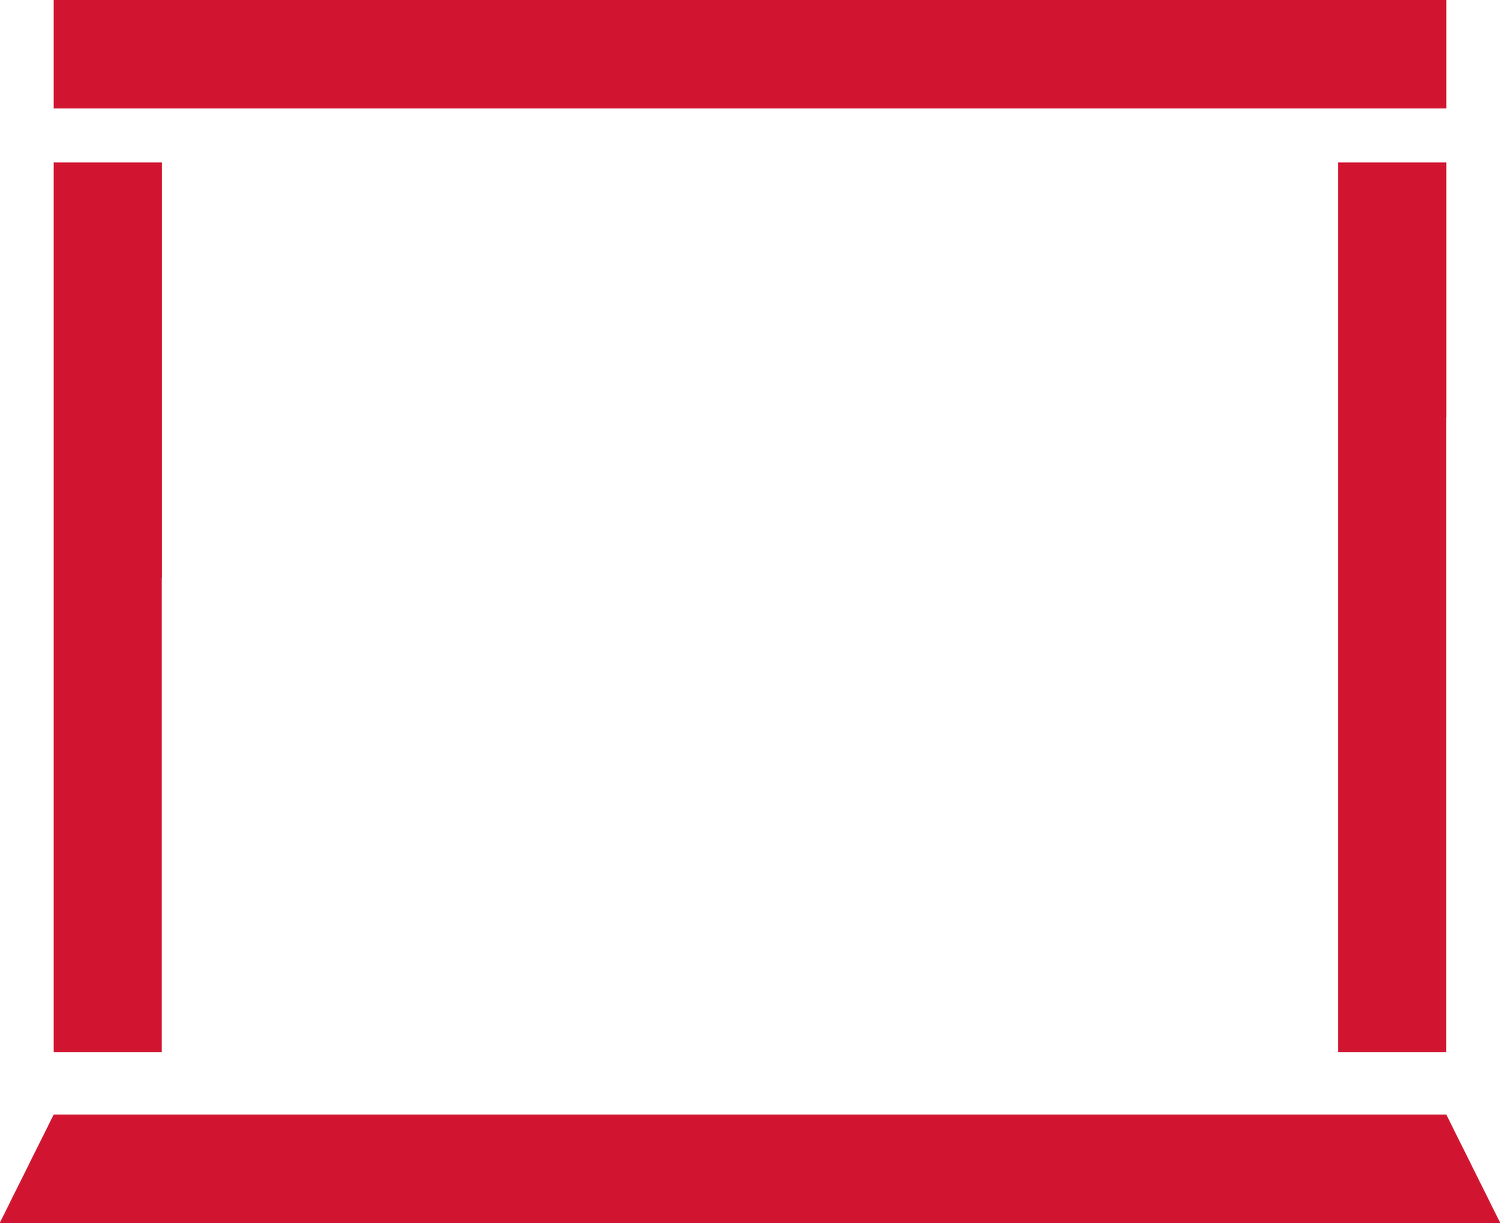 London Youth Theatre